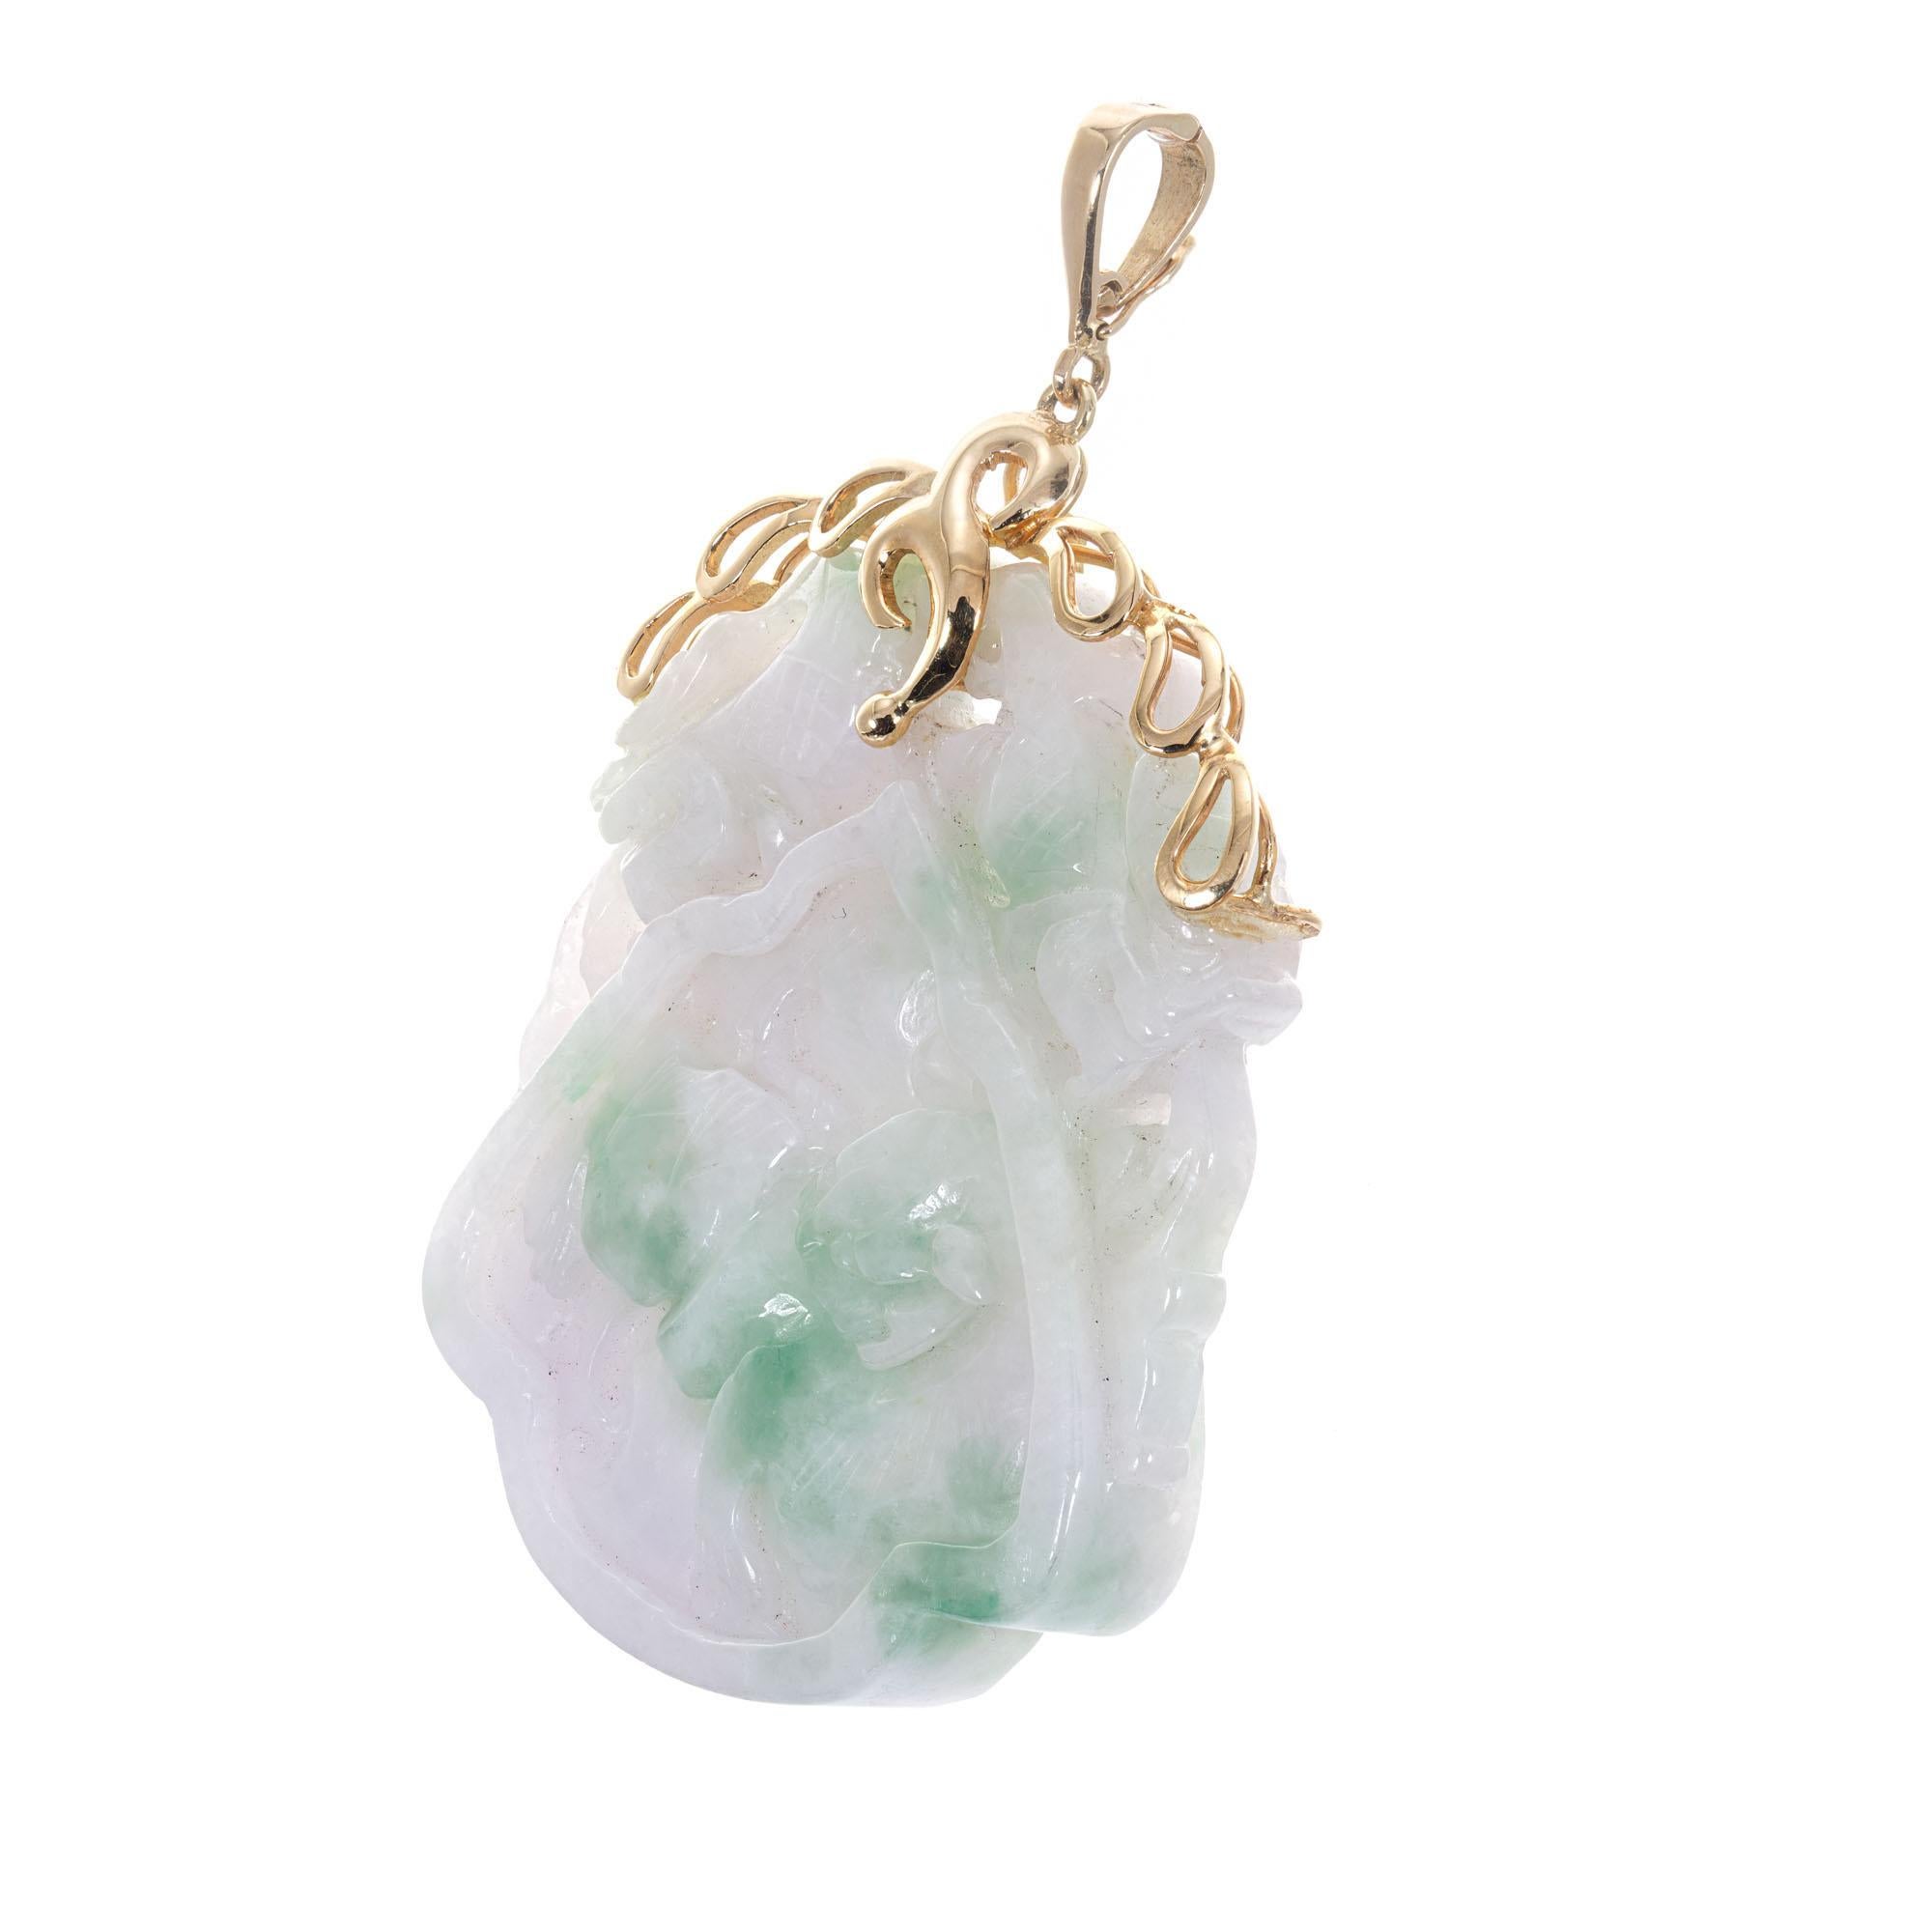 Vintage 1940-1950 intricate pierced and carved Jadeite Jade pendant. Custom designed 14k yellow gold pendant top. Later pendant enhancer bail. GIA certified natural and untreated Jadeite Jade. Carved on both sides.

1 carved & pierced variegated